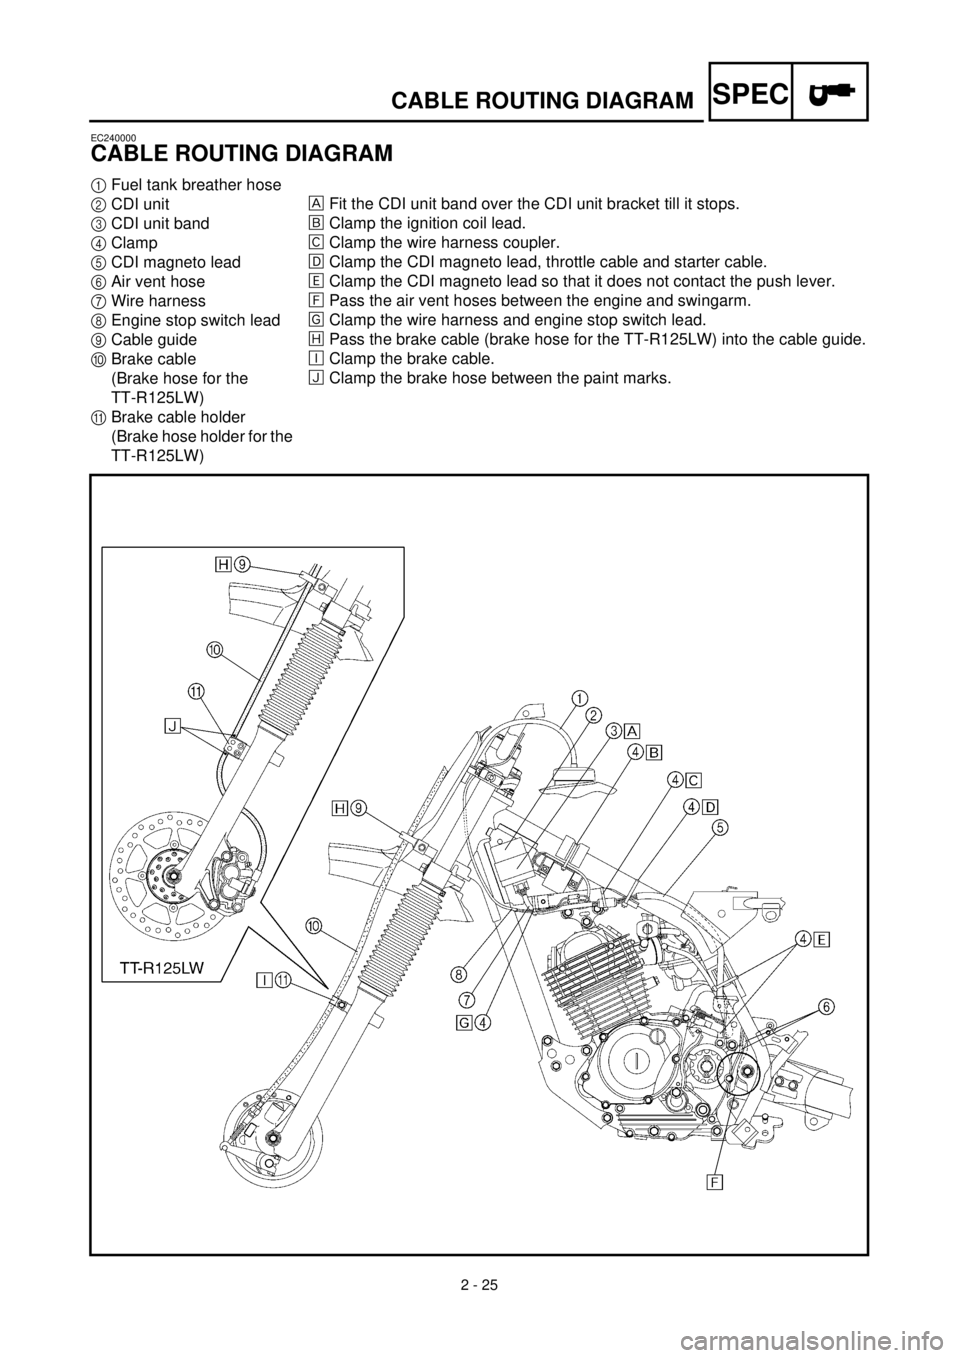 YAMAHA TTR125 2001 Owners Manual  
2 - 25
SPEC
 
CABLE ROUTING DIAGRAM 
EC240000 
CABLE ROUTING DIAGRAM 
1 
Fuel tank breather hose 
2 
CDI unit 
3 
CDI unit band 
4 
Clamp 
5 
CDI magneto lead 
6 
Air vent hose 
7 
Wire harness 
8 
